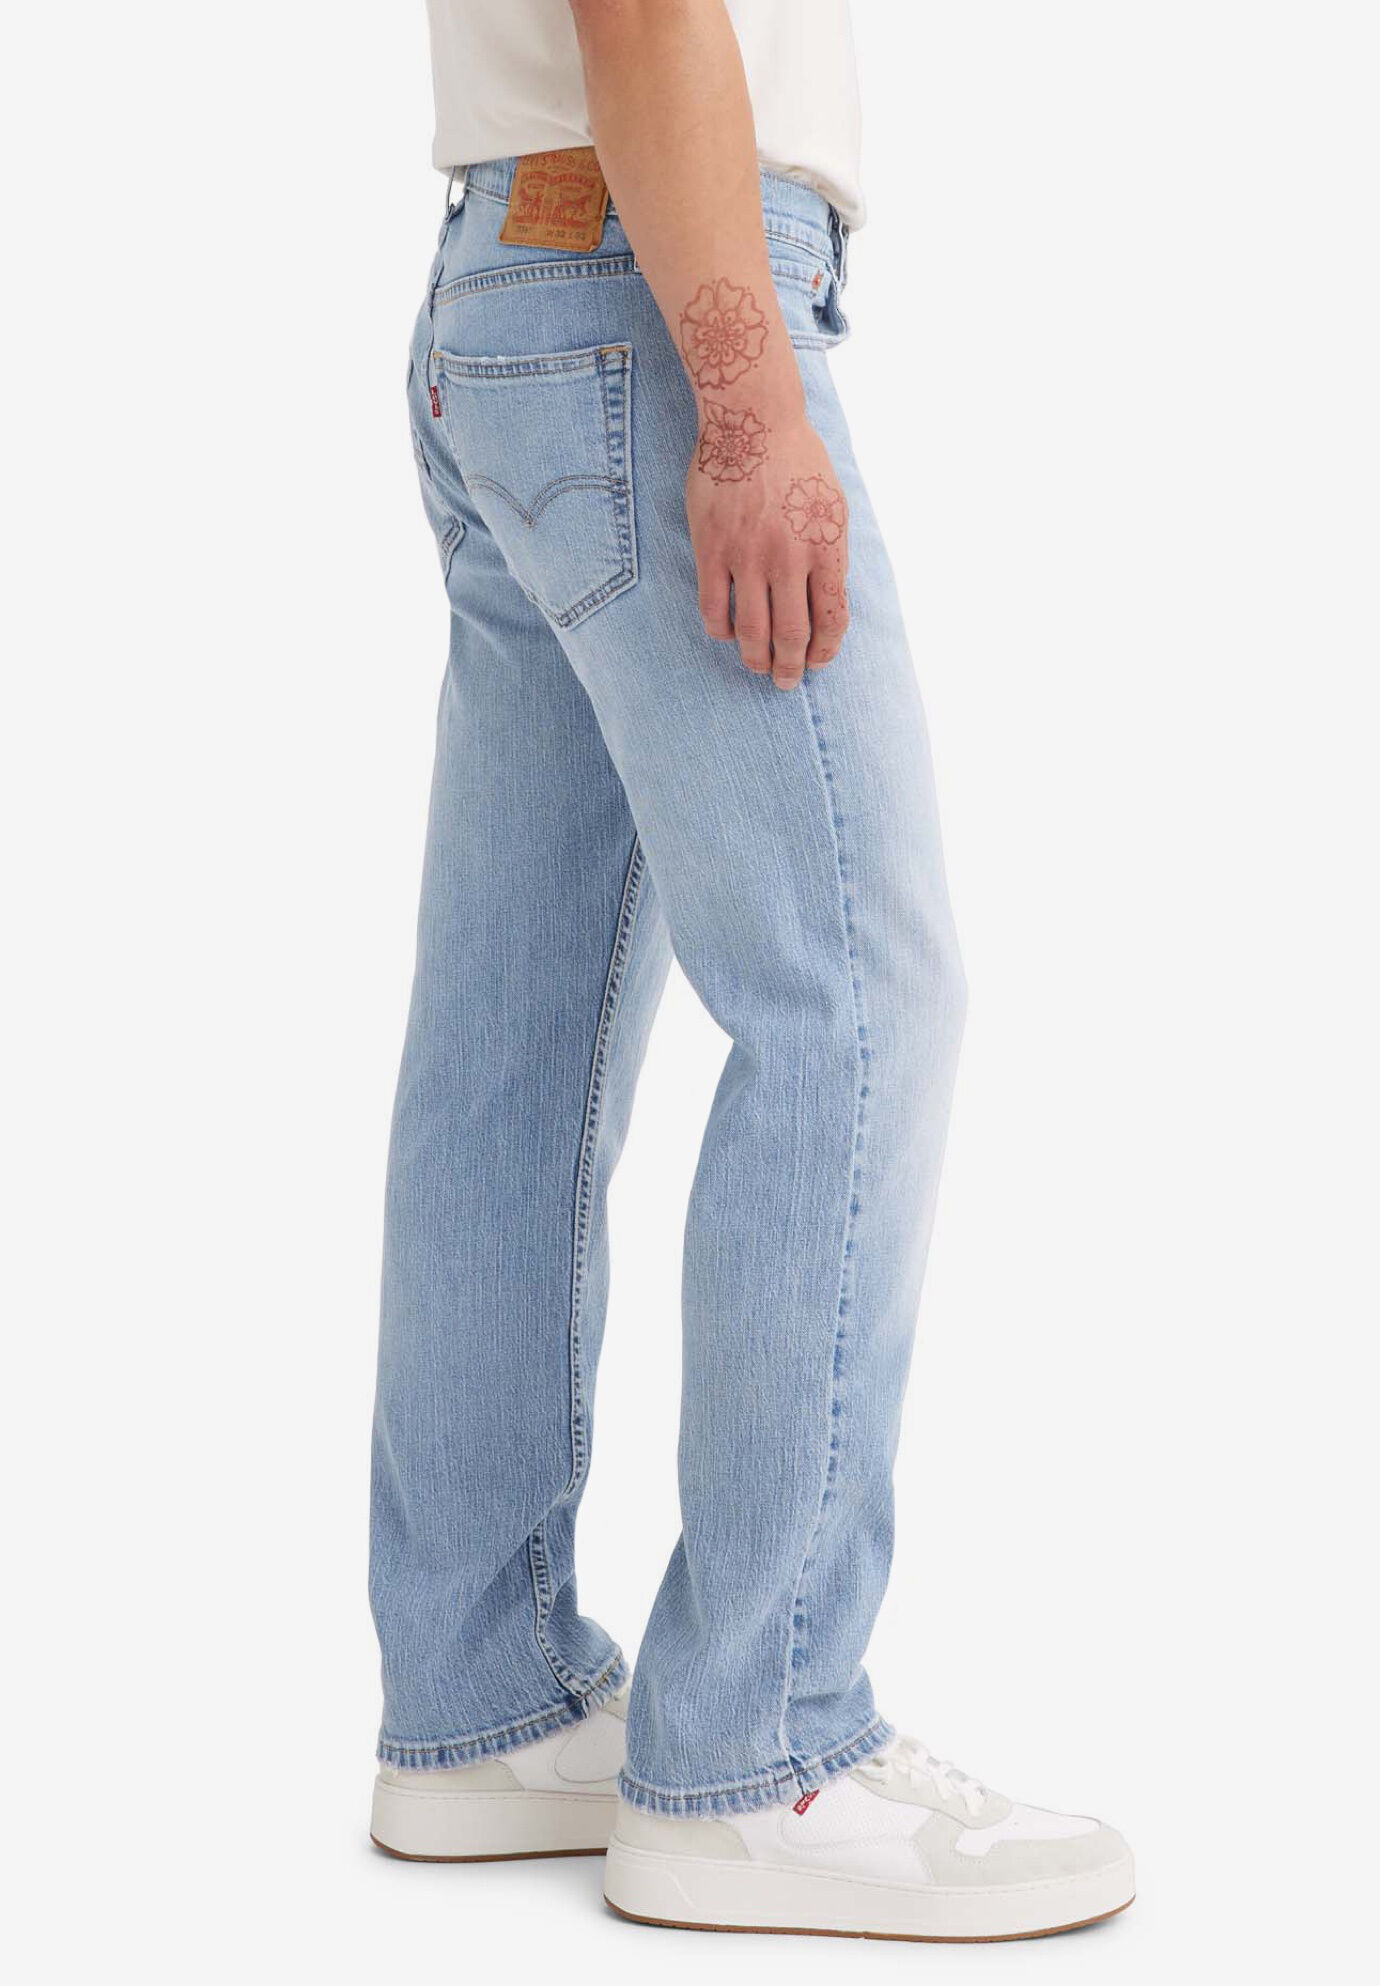 levi's jeans 559 relaxed fit